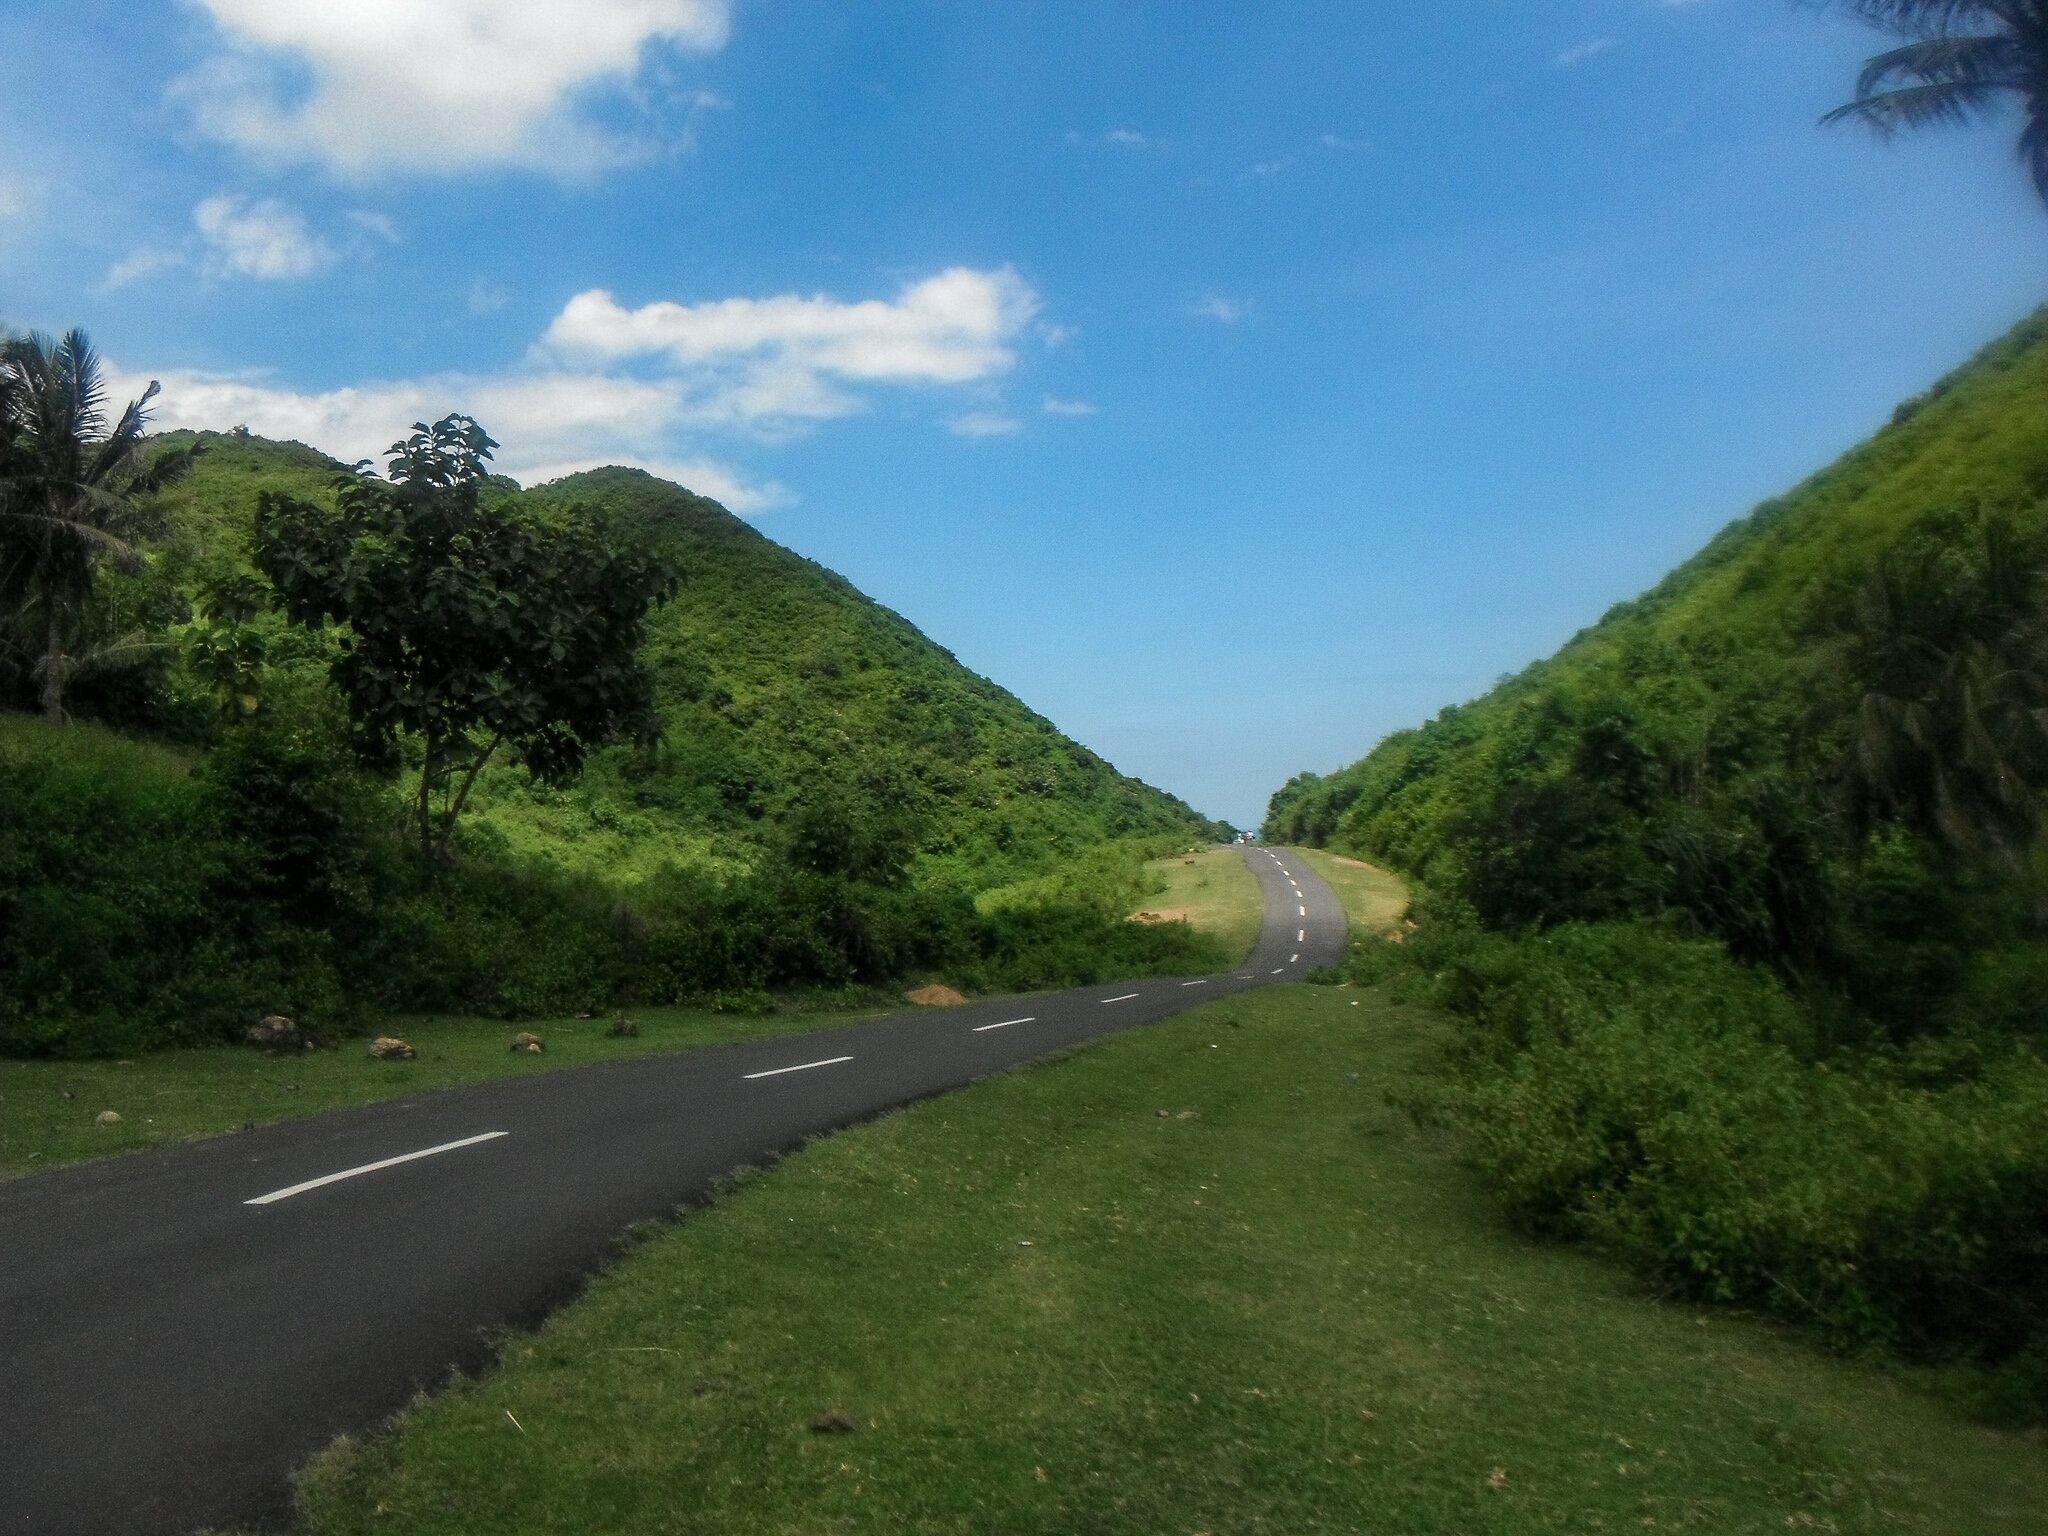  One of the roads leading to the mountains in Lombok 